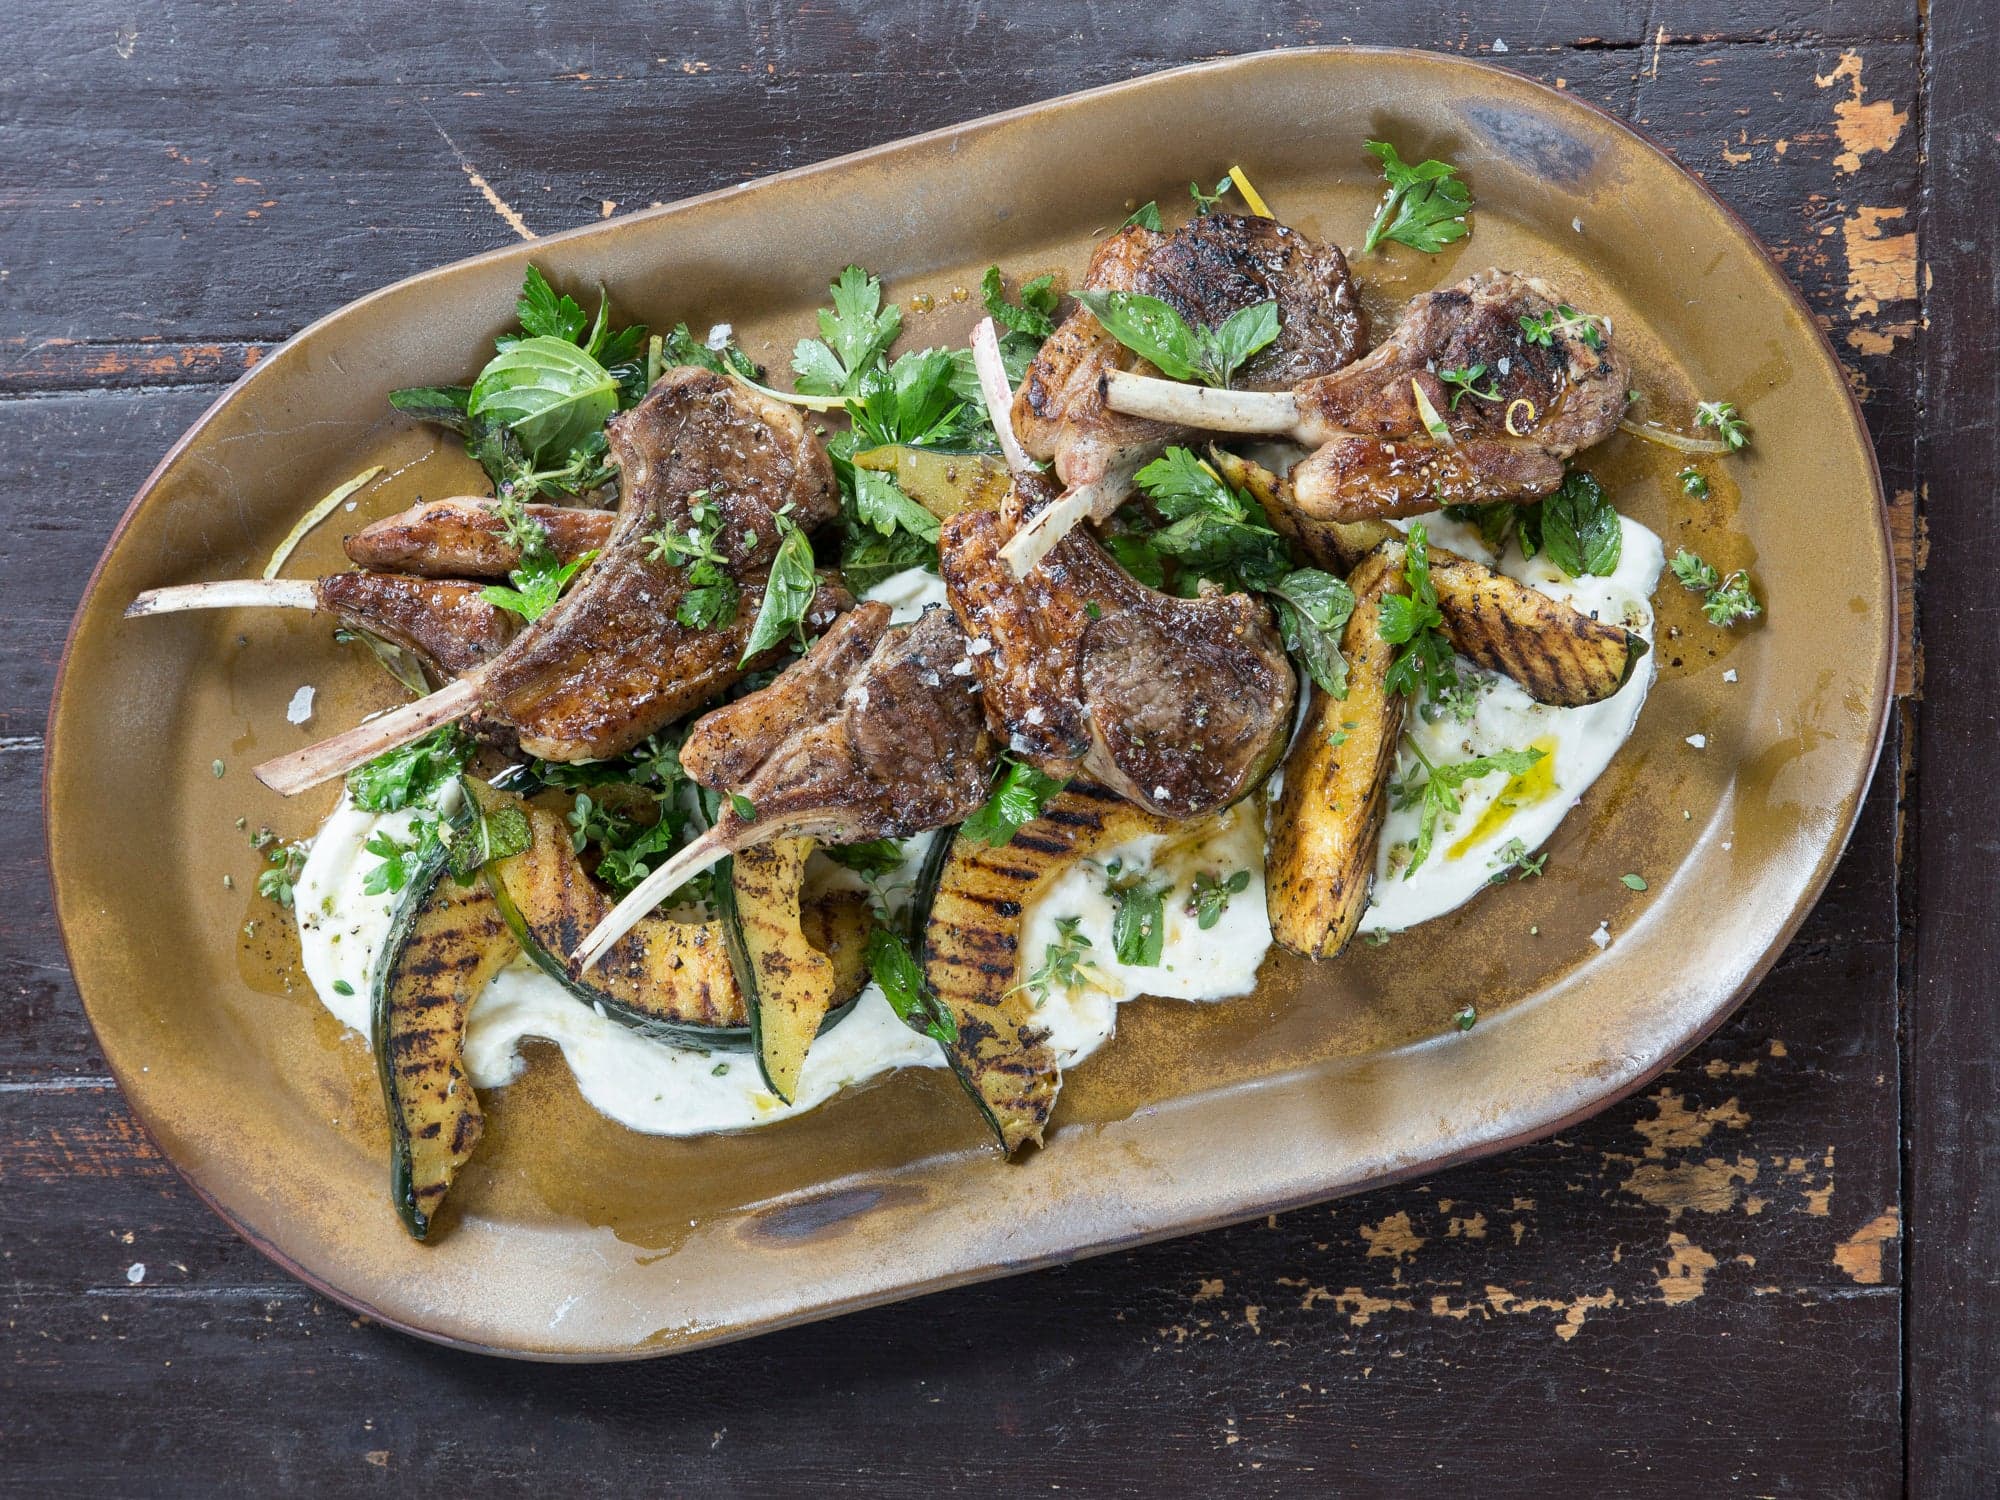 Grilled Lamb Chops and Squash with Herb Salad and Sunchokes